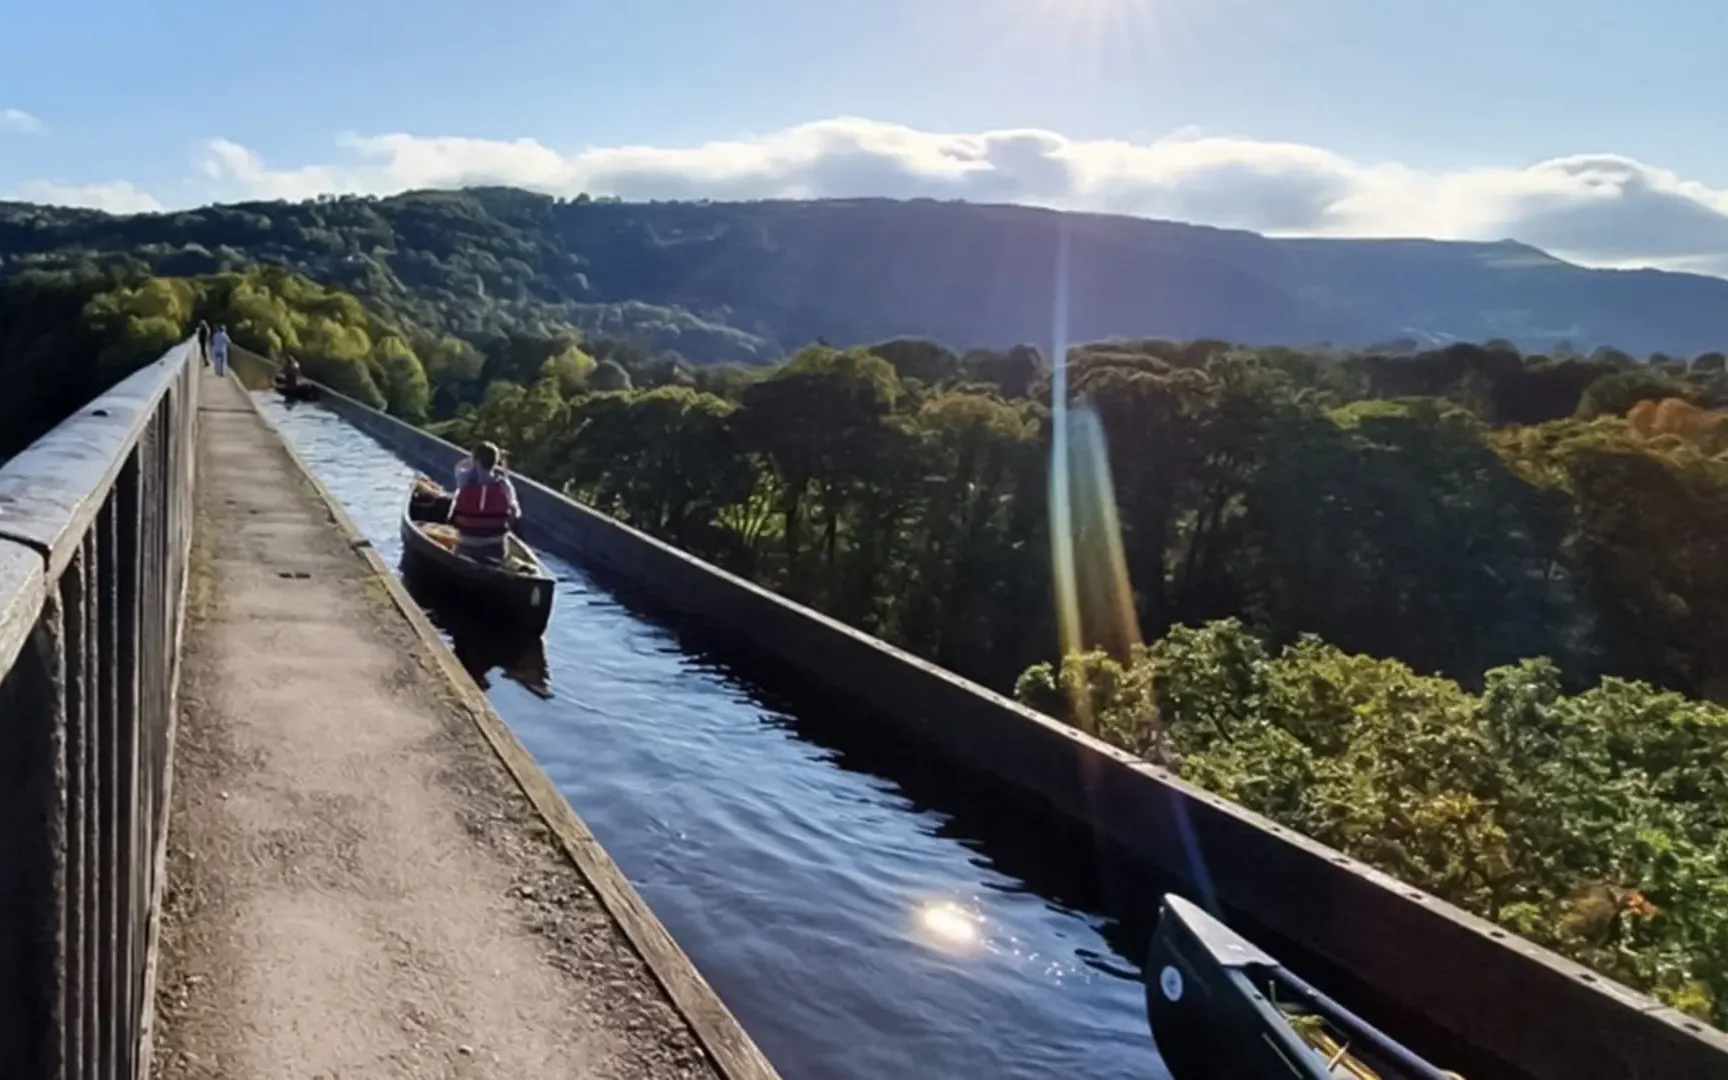 An image of someone canoeing in North Wales